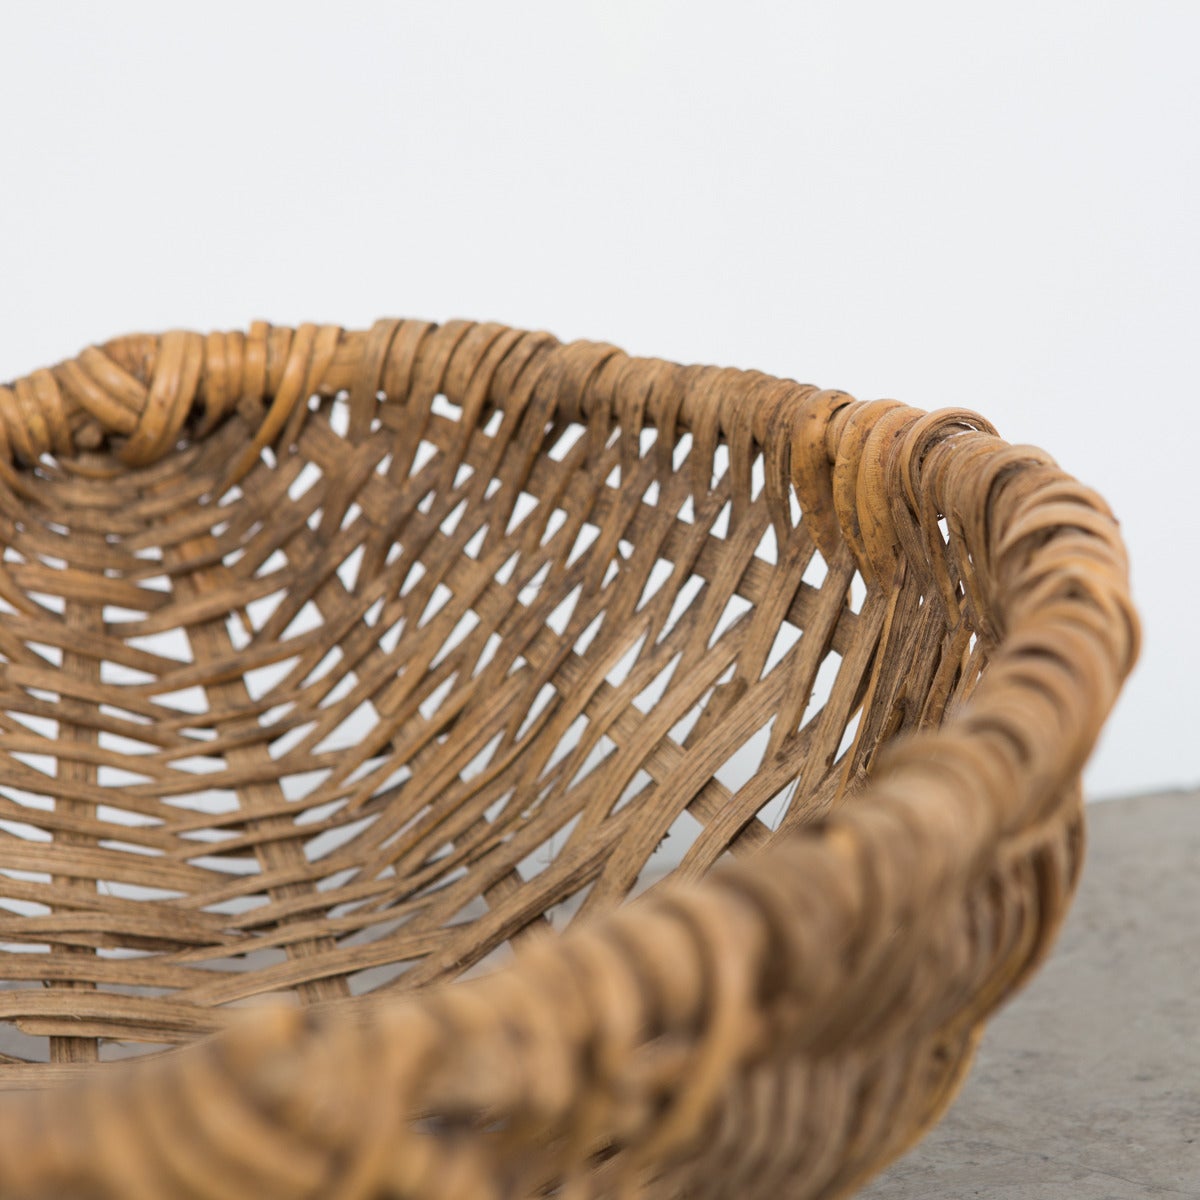 A basket made during the 19th Century in Sweden. A so called kitchen basket.